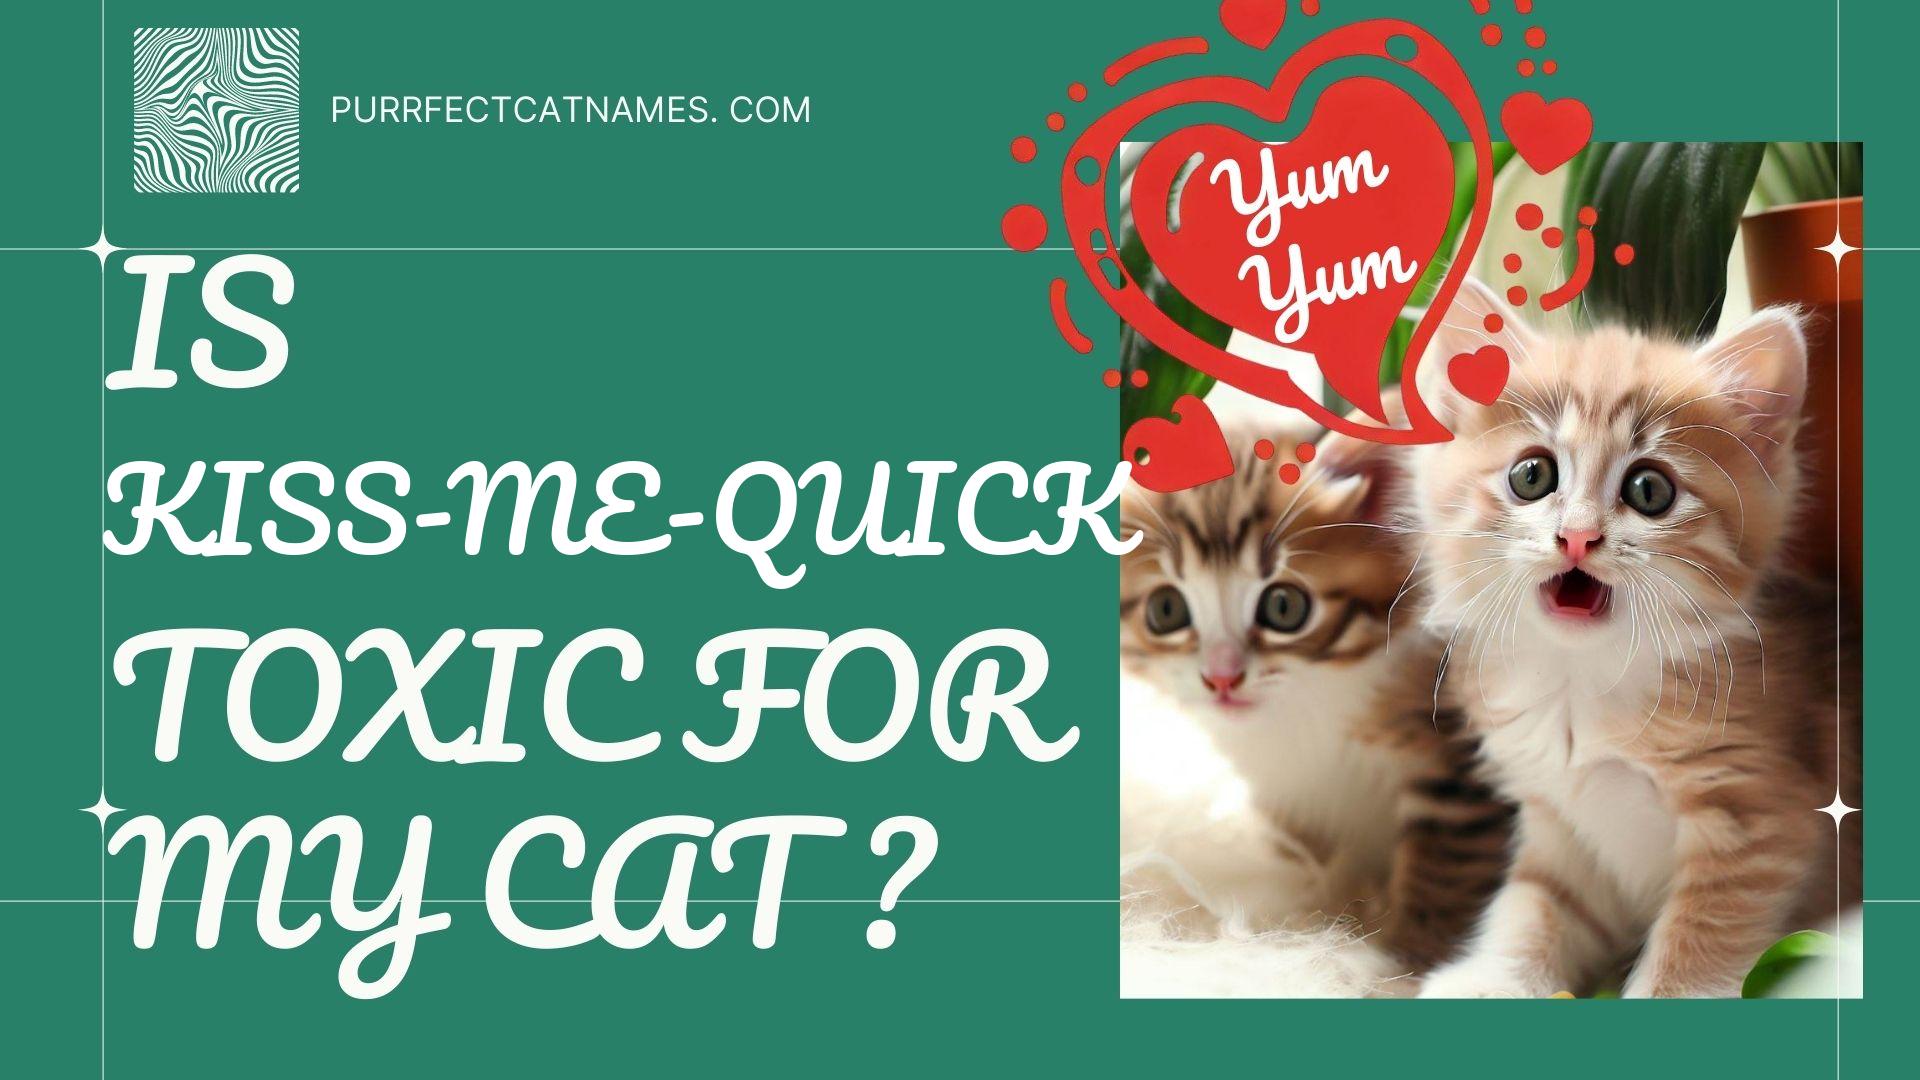 IsKiss-me-quick plant toxic for your cat